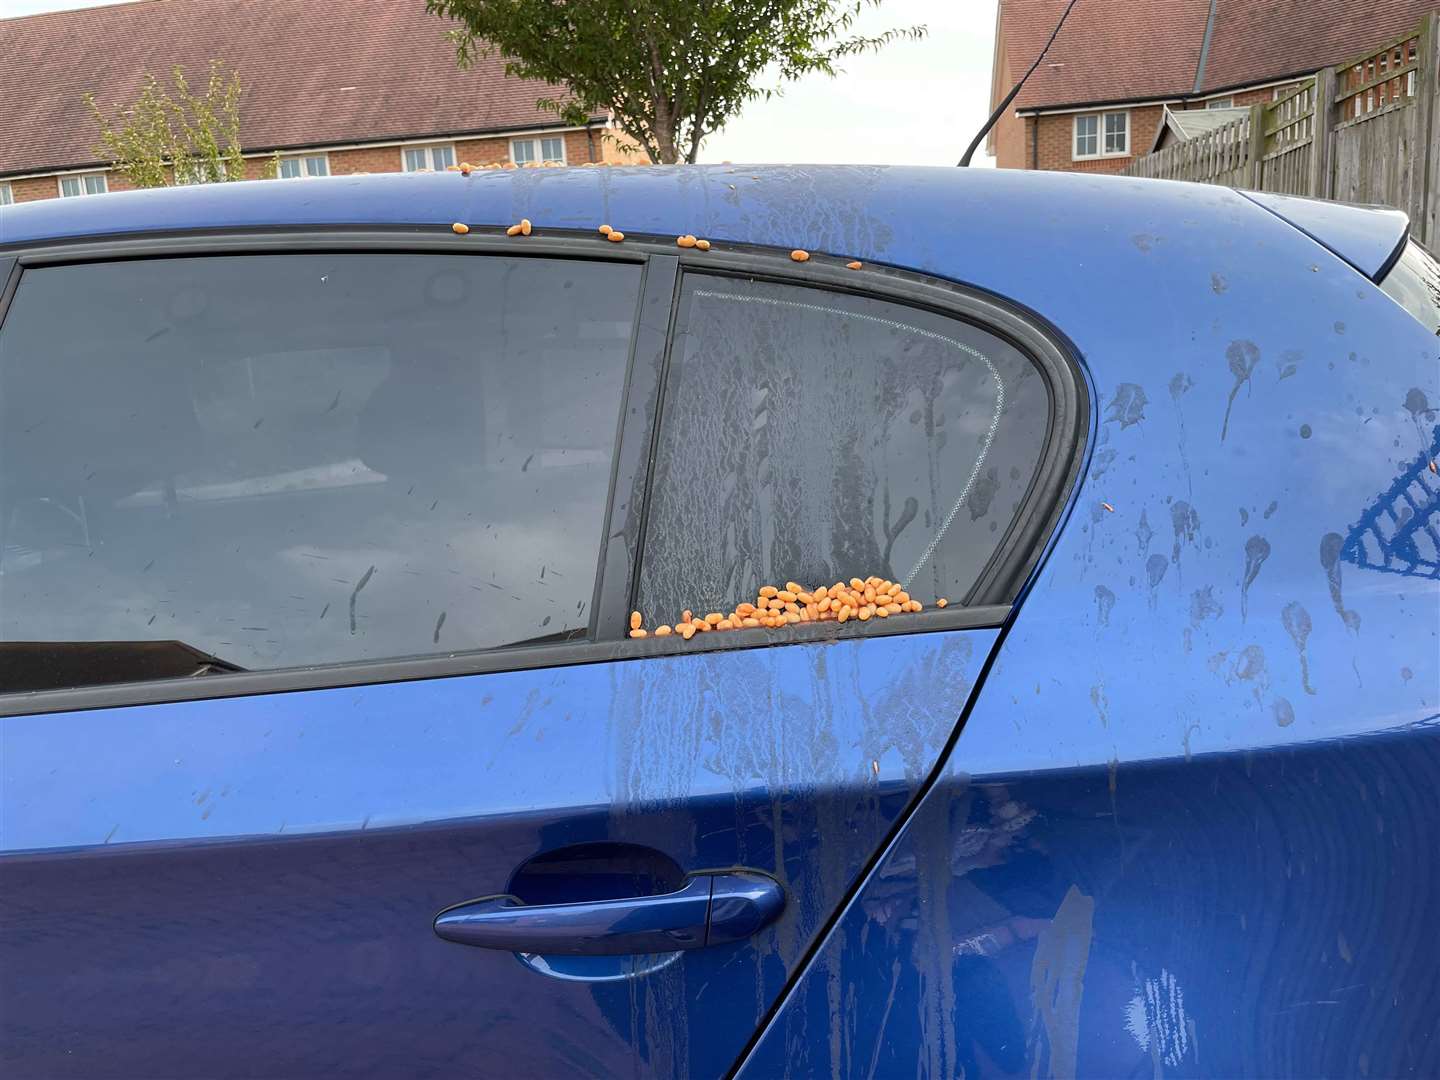 Beans, sausages and eggs were thrown at homes and cars in New Romney, Kent this week. Photo from Sheila Mclachlan.